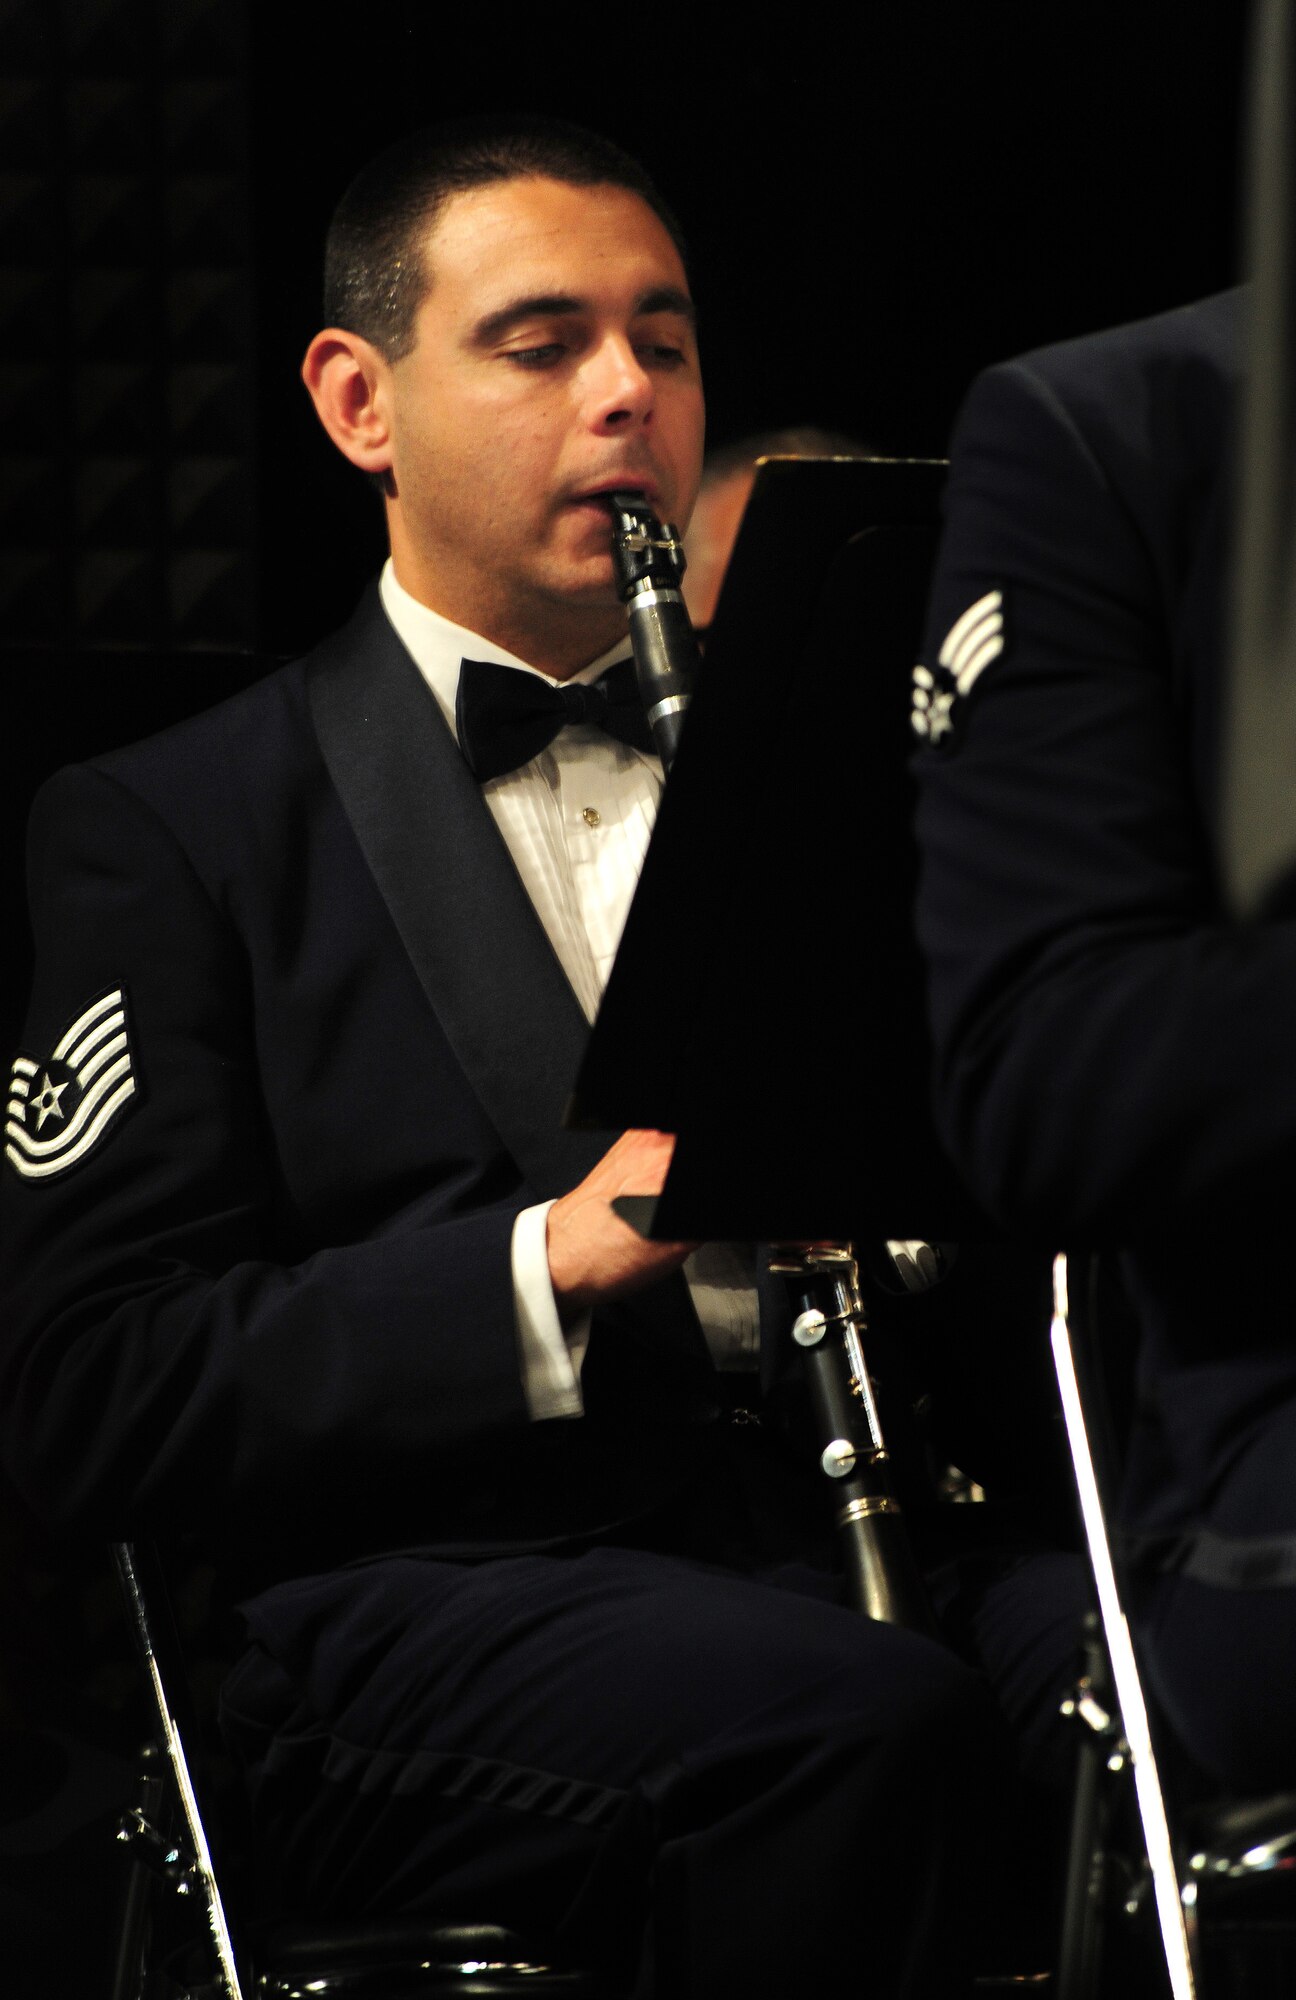 U.S. Air Force Tech. Sgt. Igor Poklad, clarinetist and publicity representative with the United States Air Forces in Europe Band, performs durring a concert, May 4, 2011, Bratislava, Slovakia. The USAFE concert band was on tour through three countries, performing at eight locations as a part of a building partnerships capacity and community outreach initiative. (U.S. Air Force Photo by Tech Sgt. Jocelyn L. Rich)